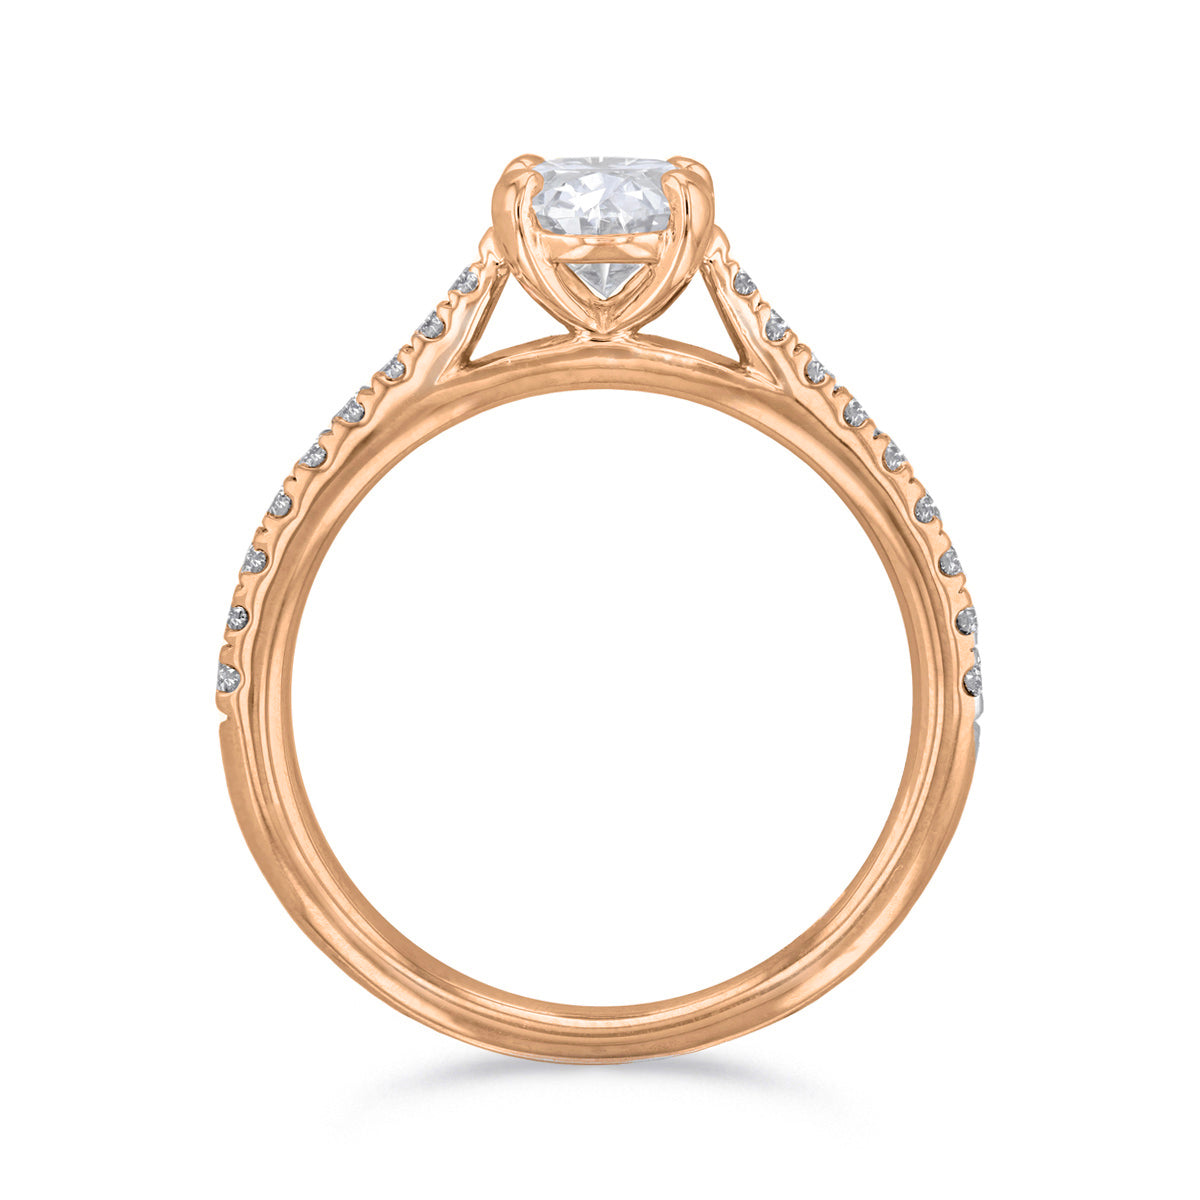 1-50ct-ophelia-shoulder-set-oval-cut-solitaire-diamond-engagement-ring-18ct-rose-gold